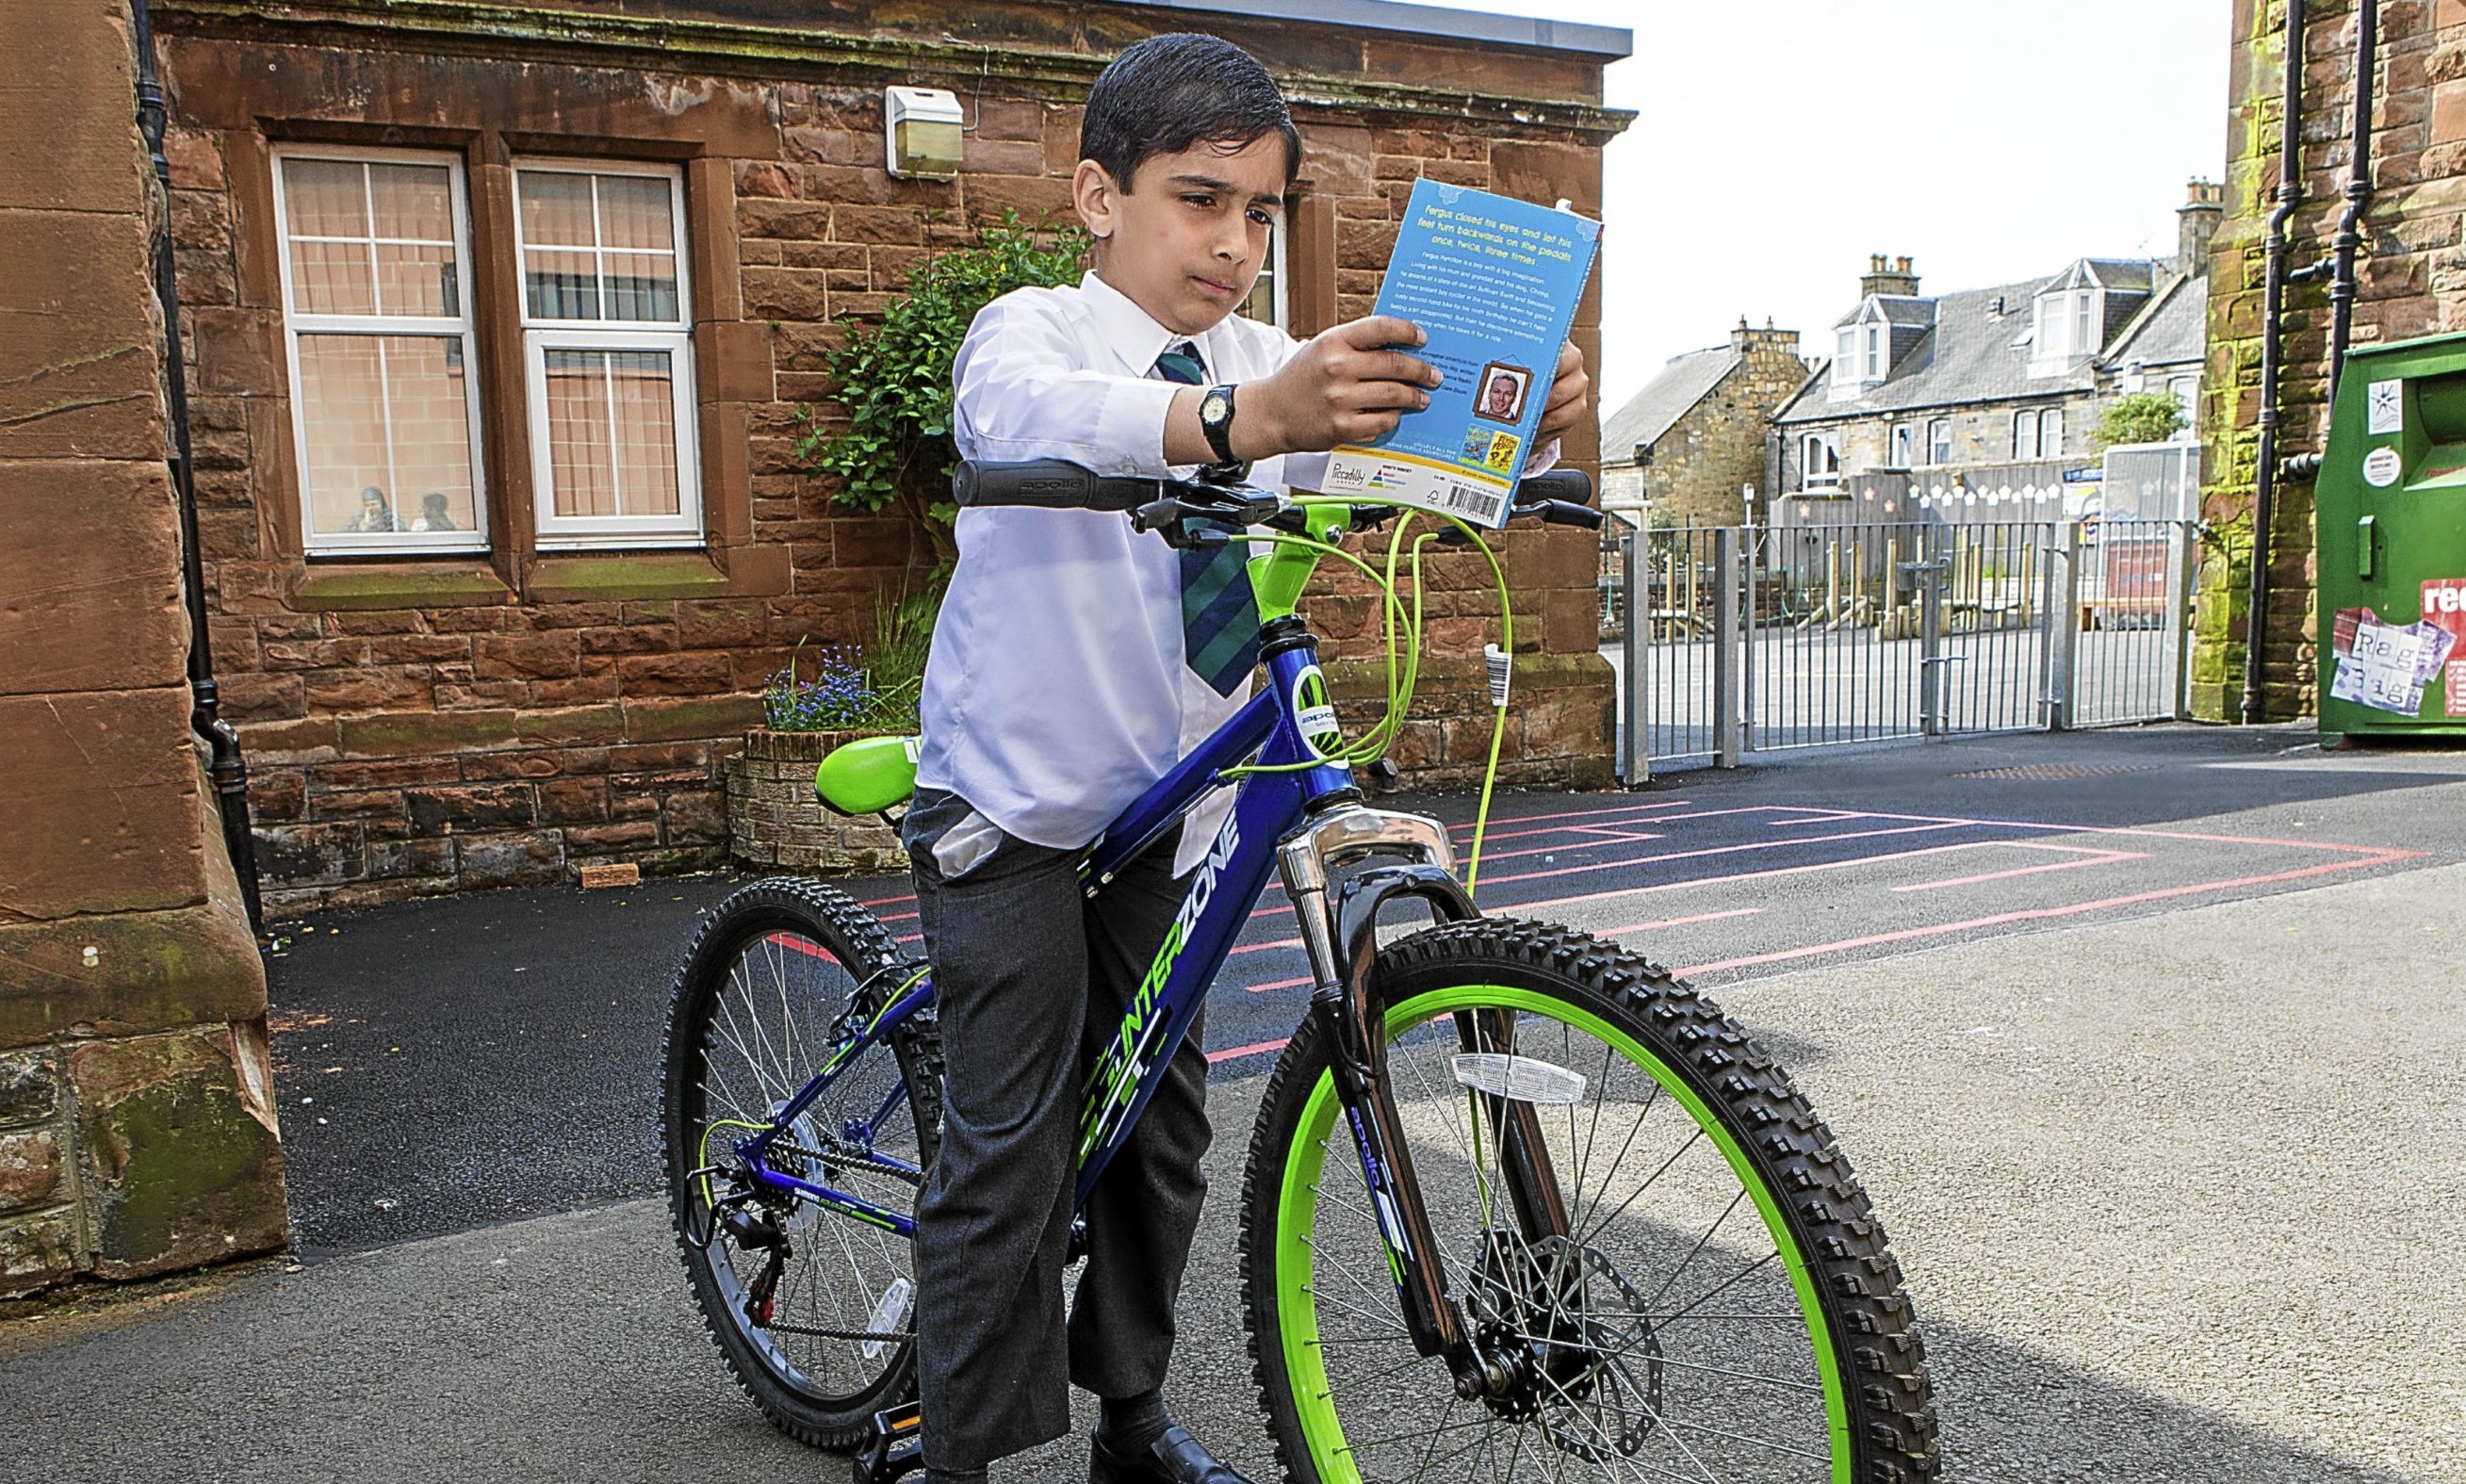 Daanyaal with his new bike and book from Sir Chris Hoy.